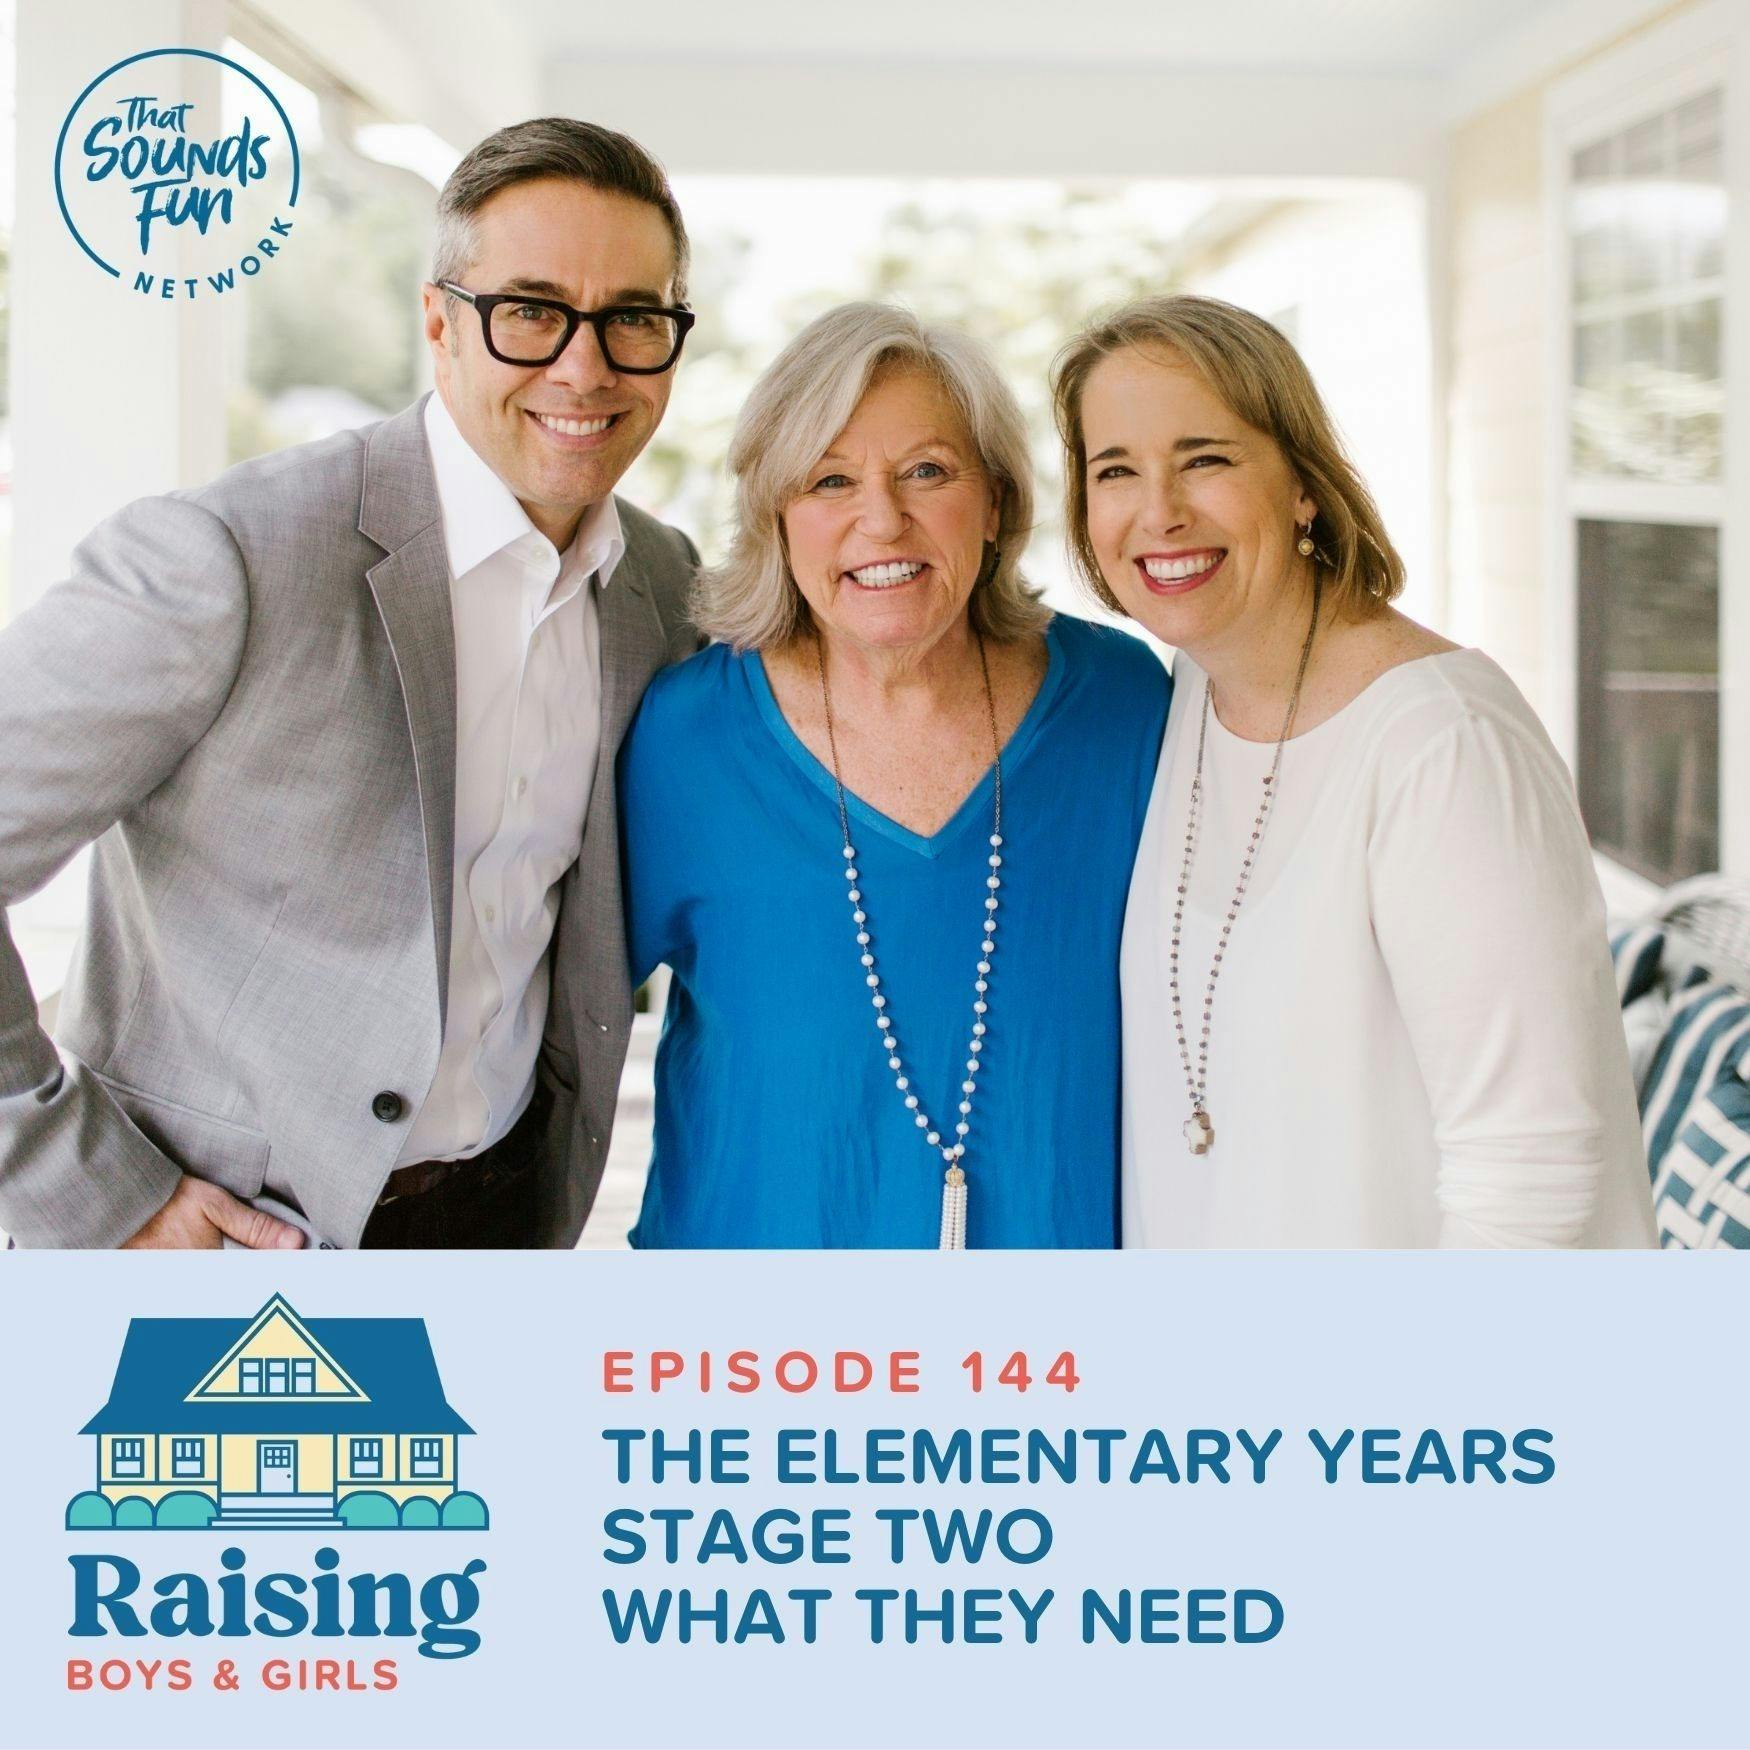 Episode 144: The Elementary Years - Stage 2—What They Need